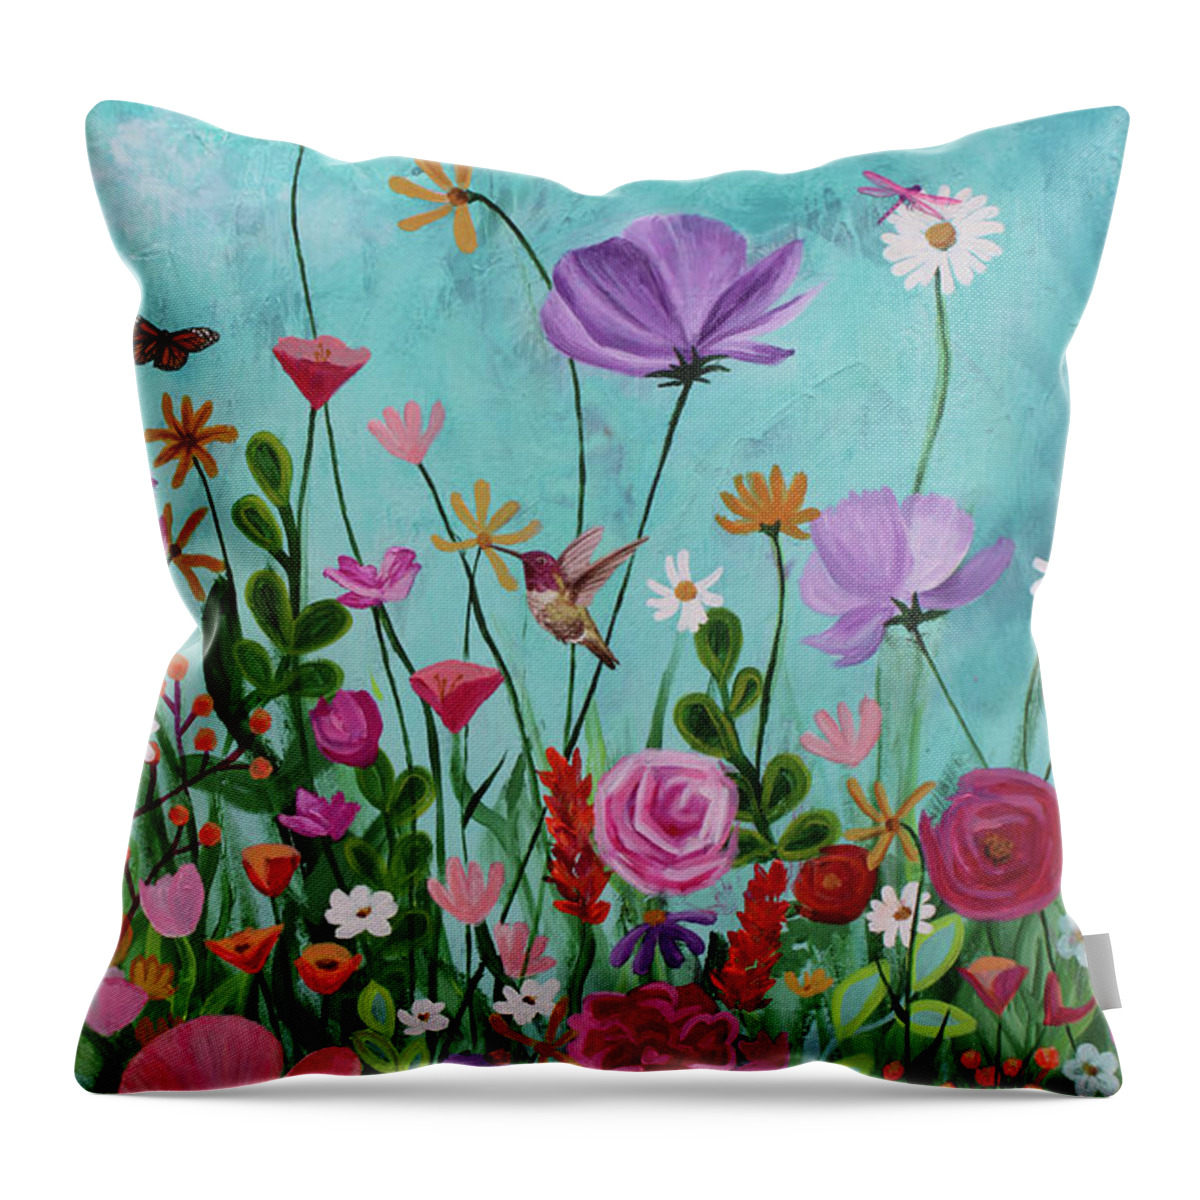 Hummingbird Throw Pillow featuring the painting Wild and Wondrous by Ashley Lane